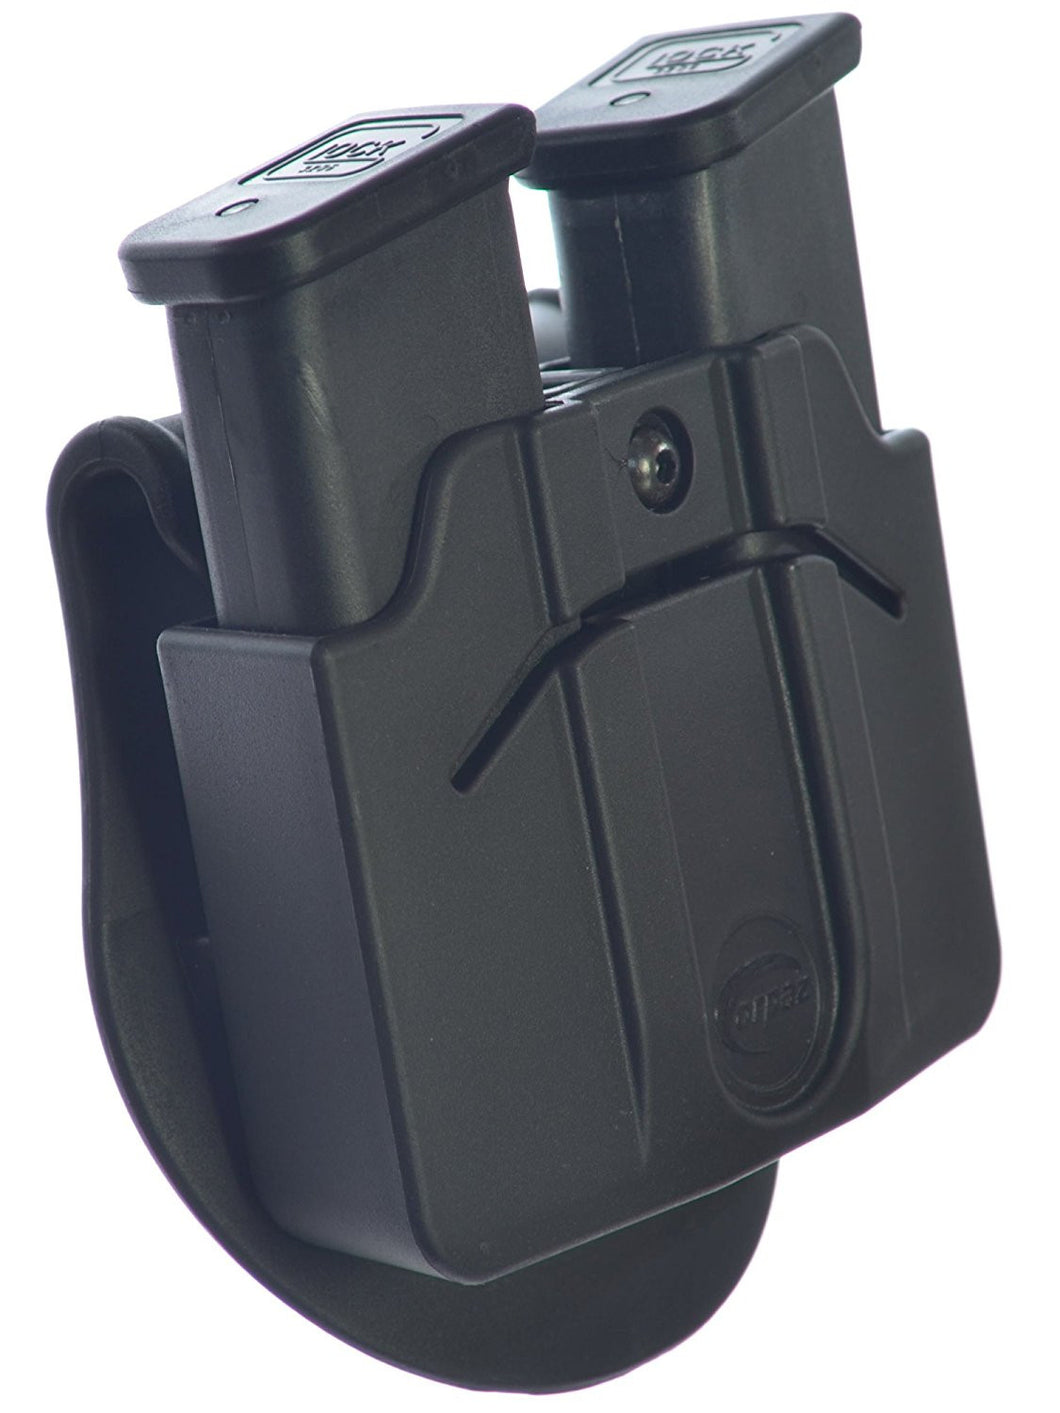 Orpaz Magazine Holster for Two Double Stack 9mm METAL Magazines, Fully Adjustable